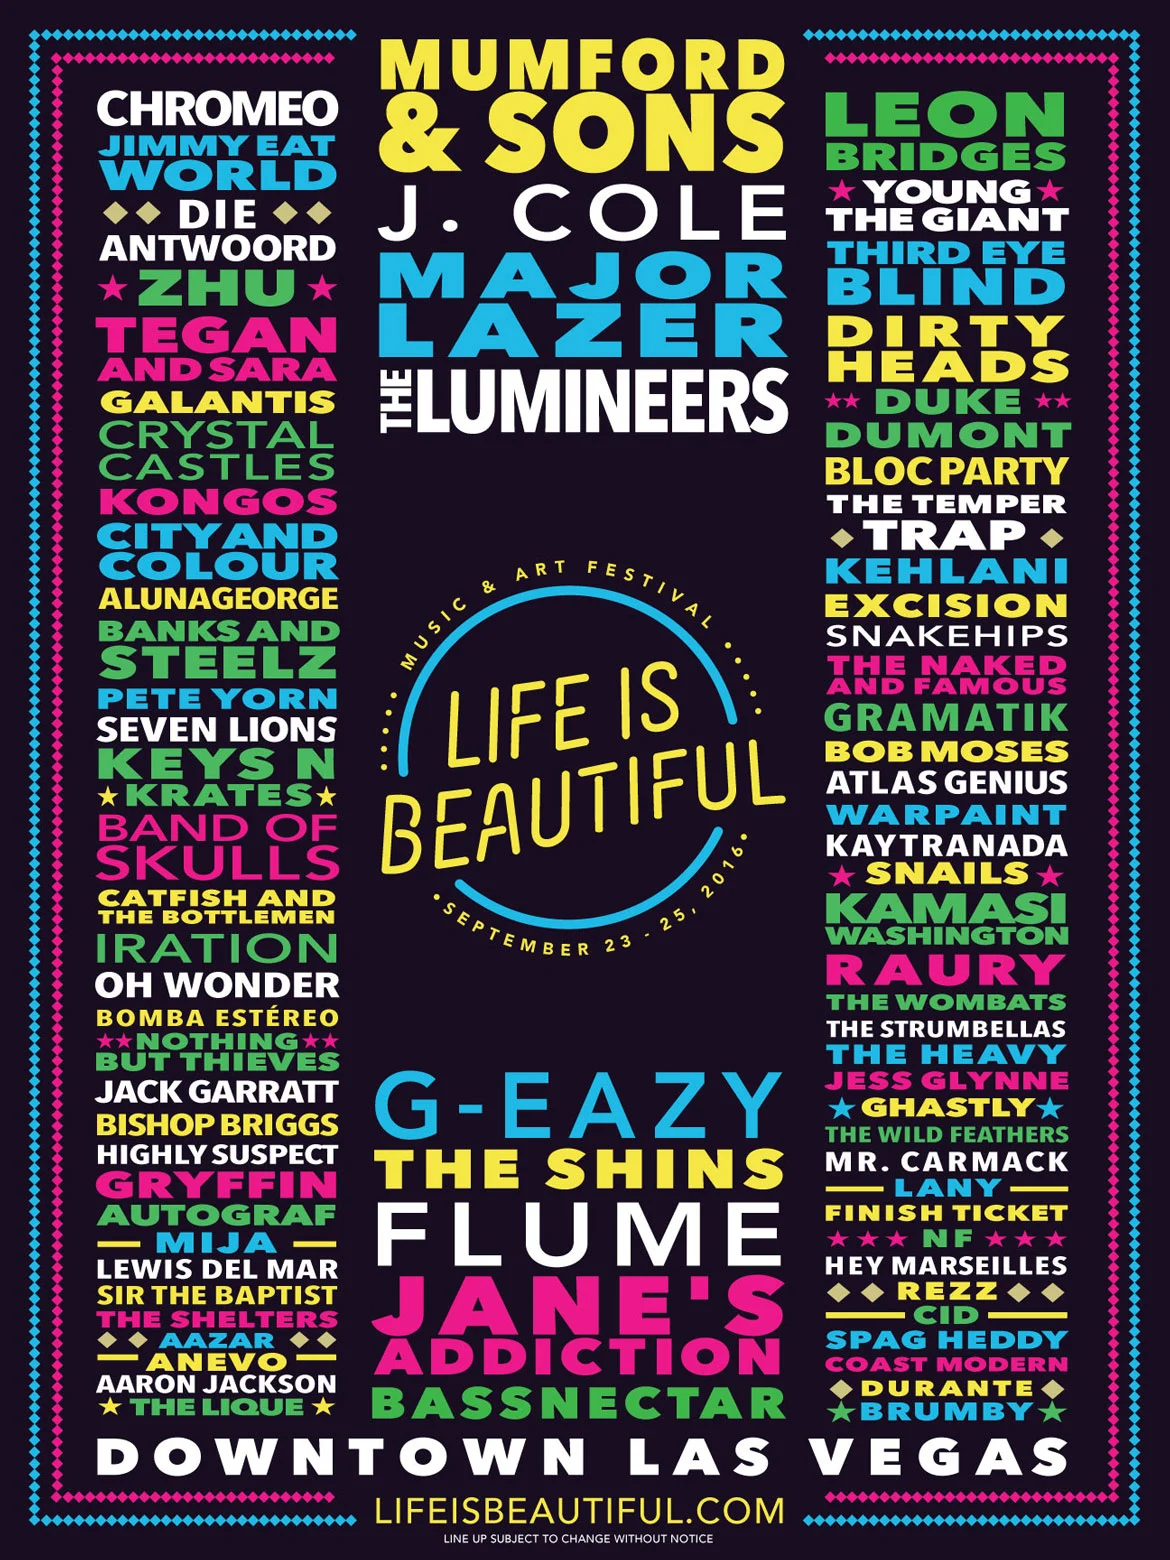 Life Is Beautiful Festival Lineup 2016